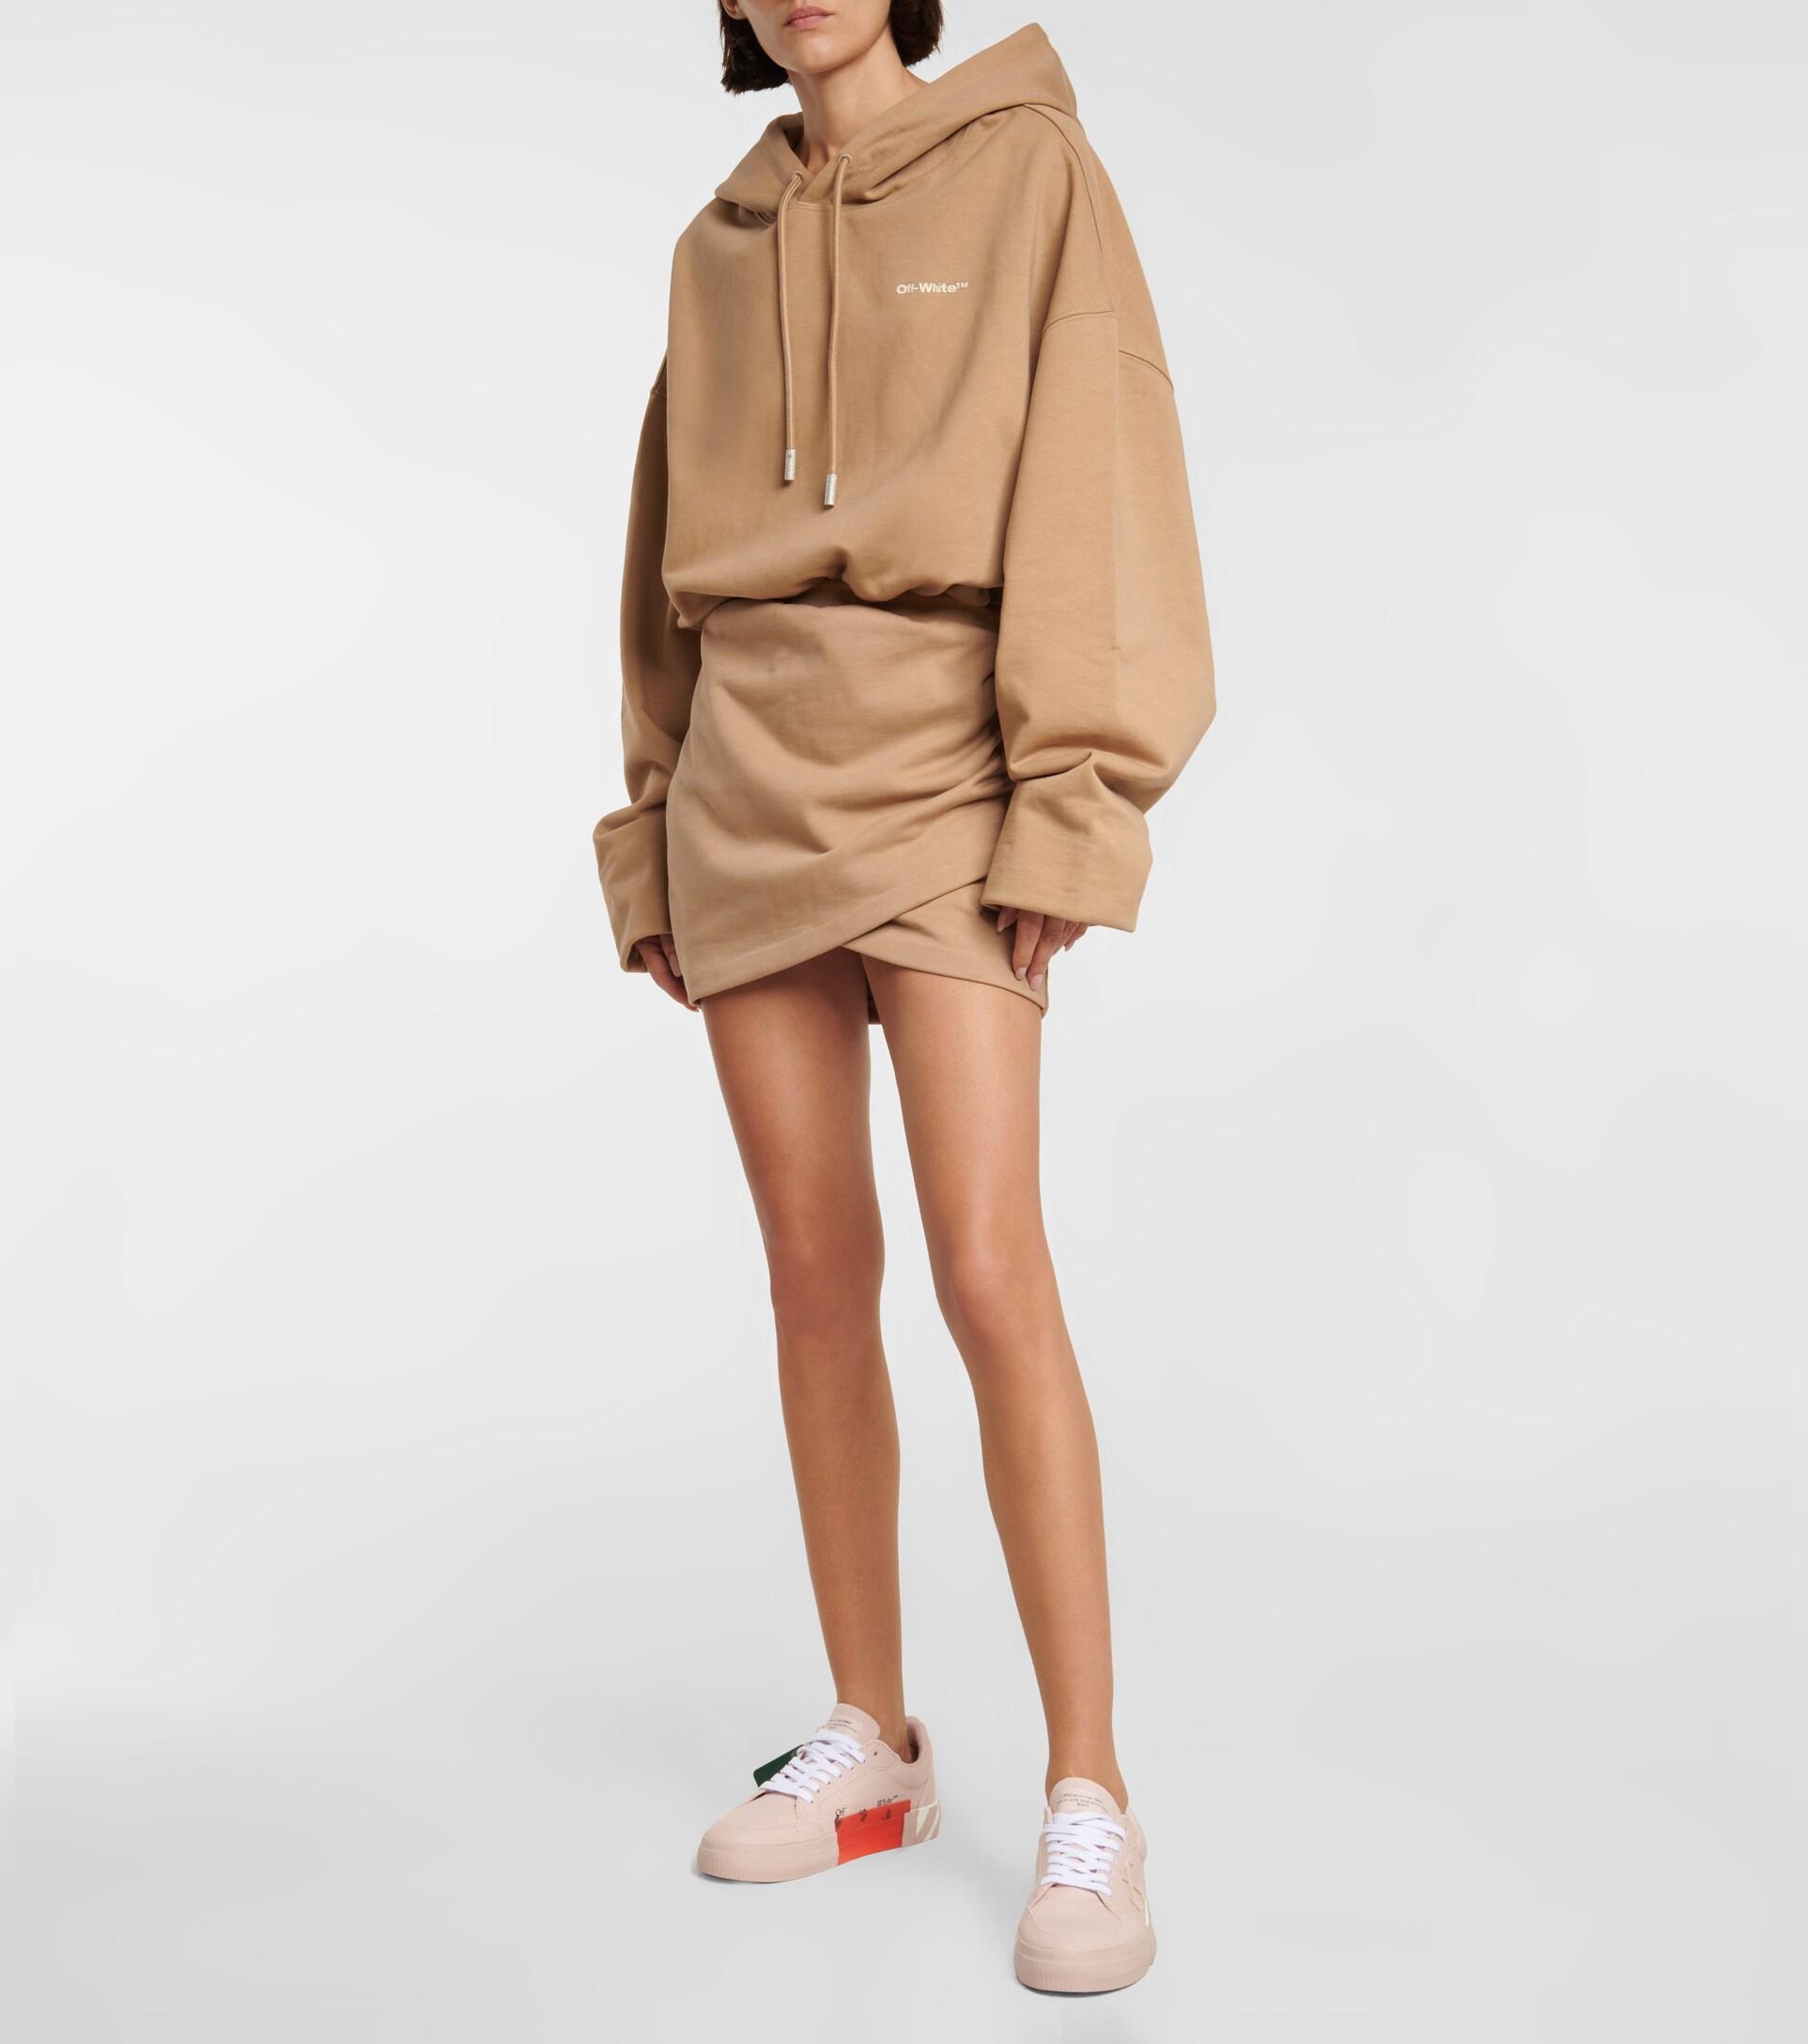 Off-White c/o Virgil Abloh Cotton Jersey Hoodie Dress in Brown | Lyst